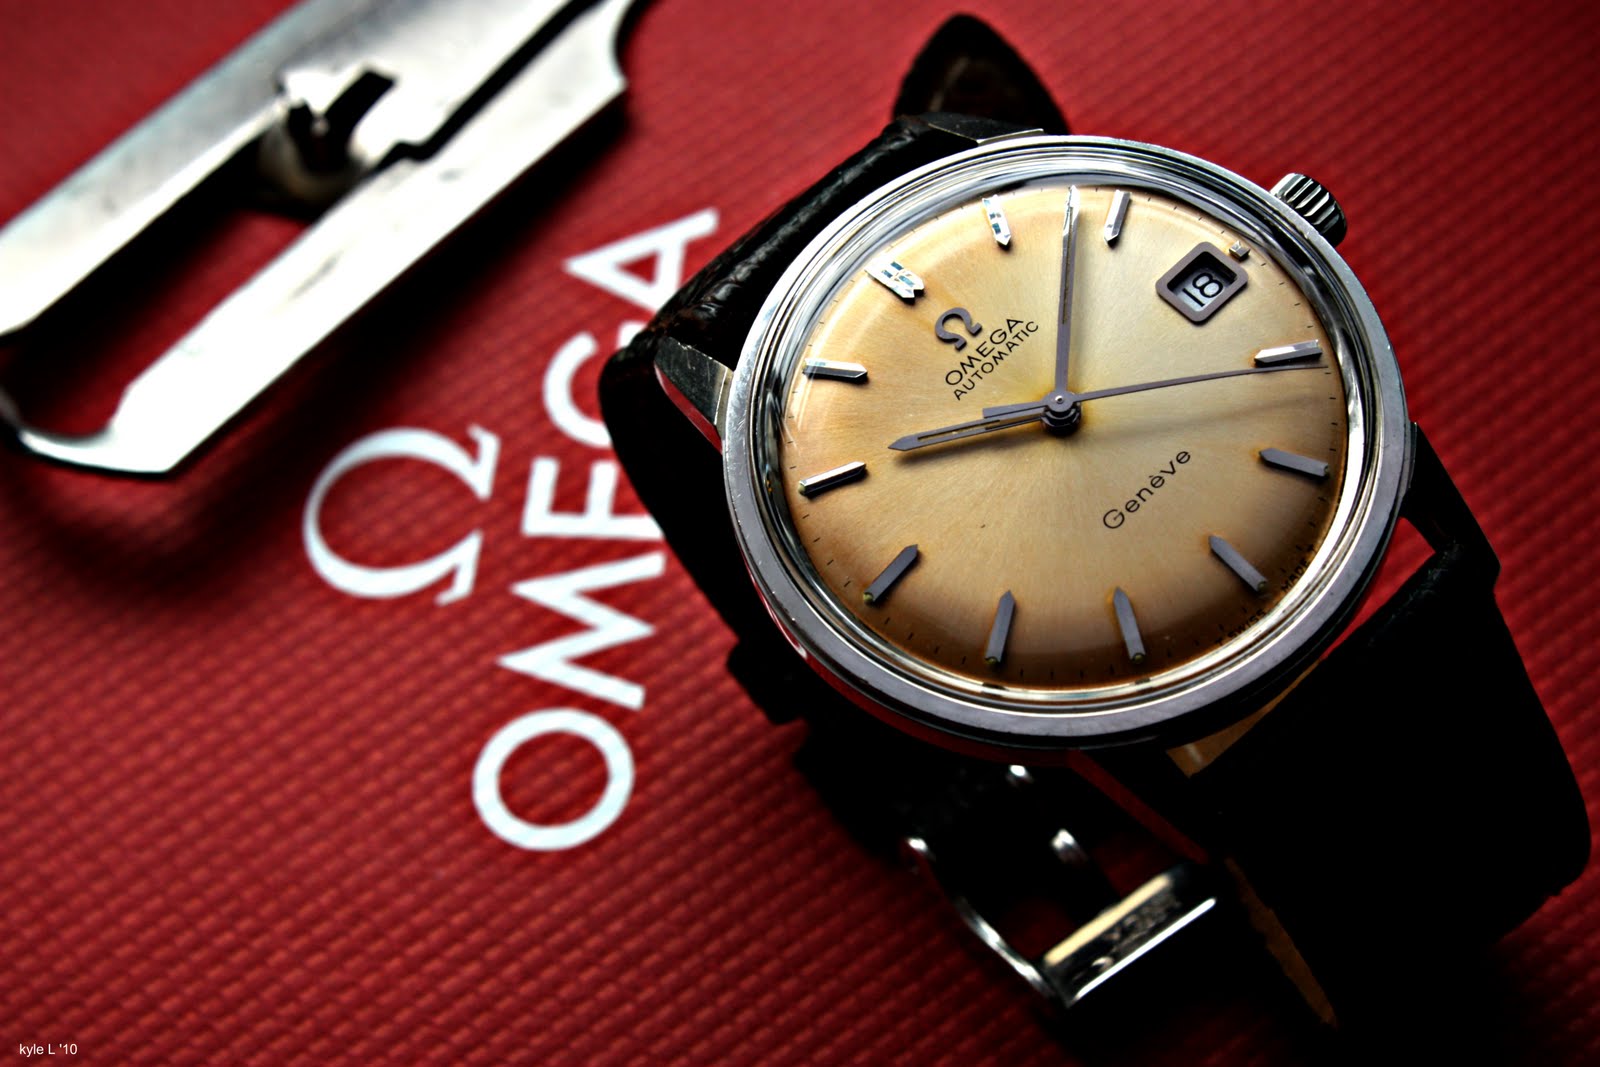 Kyle S Watch Wallpaper Omega Geneve Cal